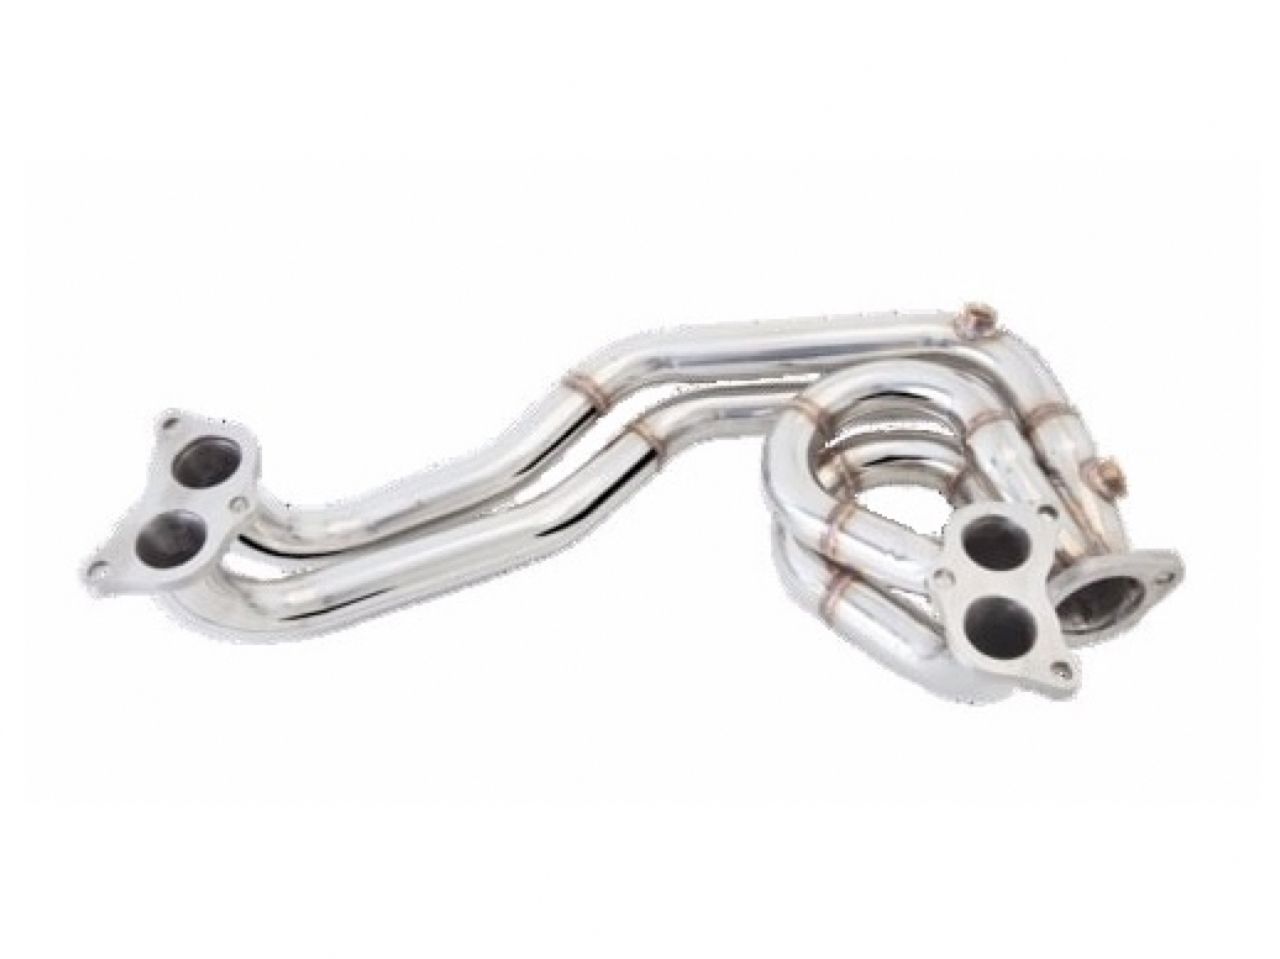 XForce Stainless Steel Equal Length Header - Toyota 86 Scion FRS Subaru BRZ